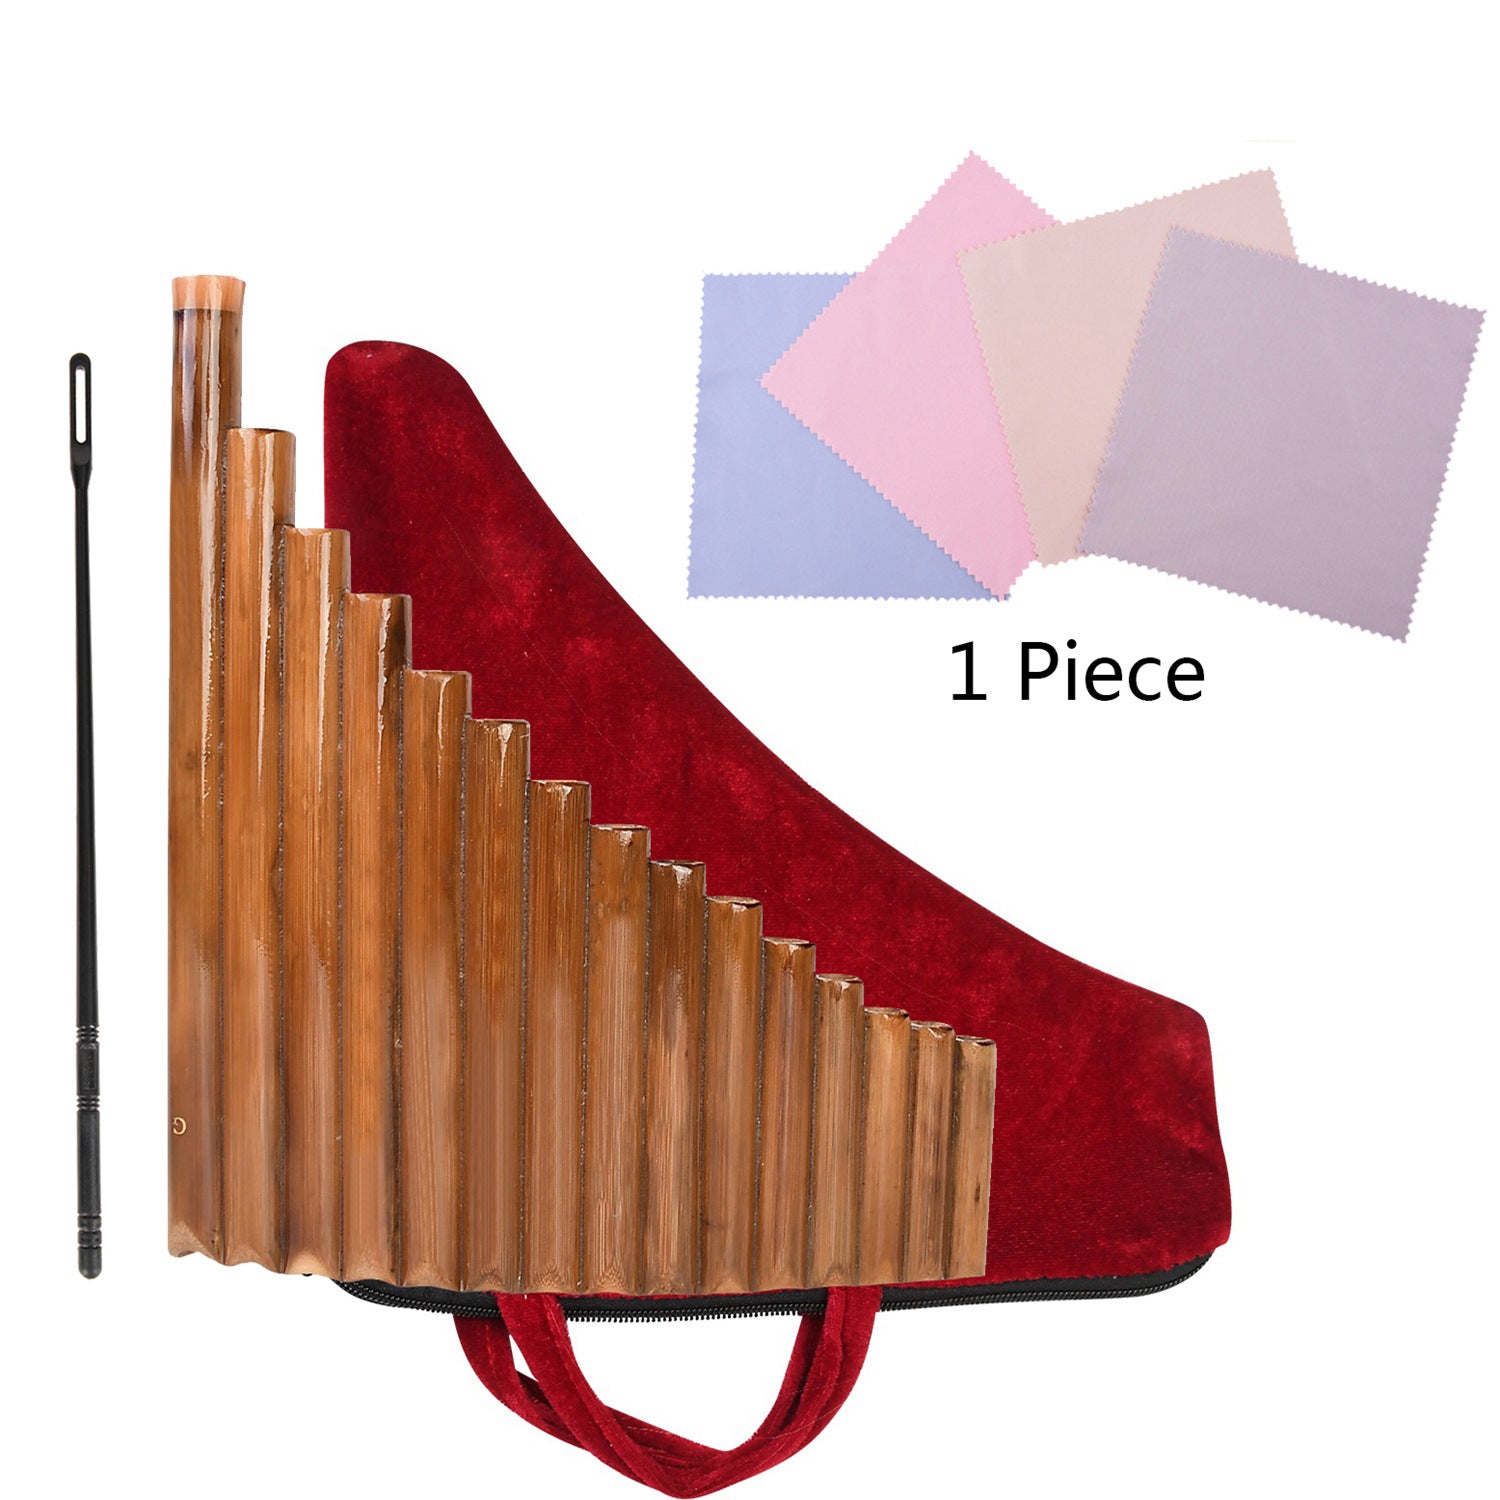  Eujgoov Pan Flute 15 Pipes Pan Flute G Tone Chinese